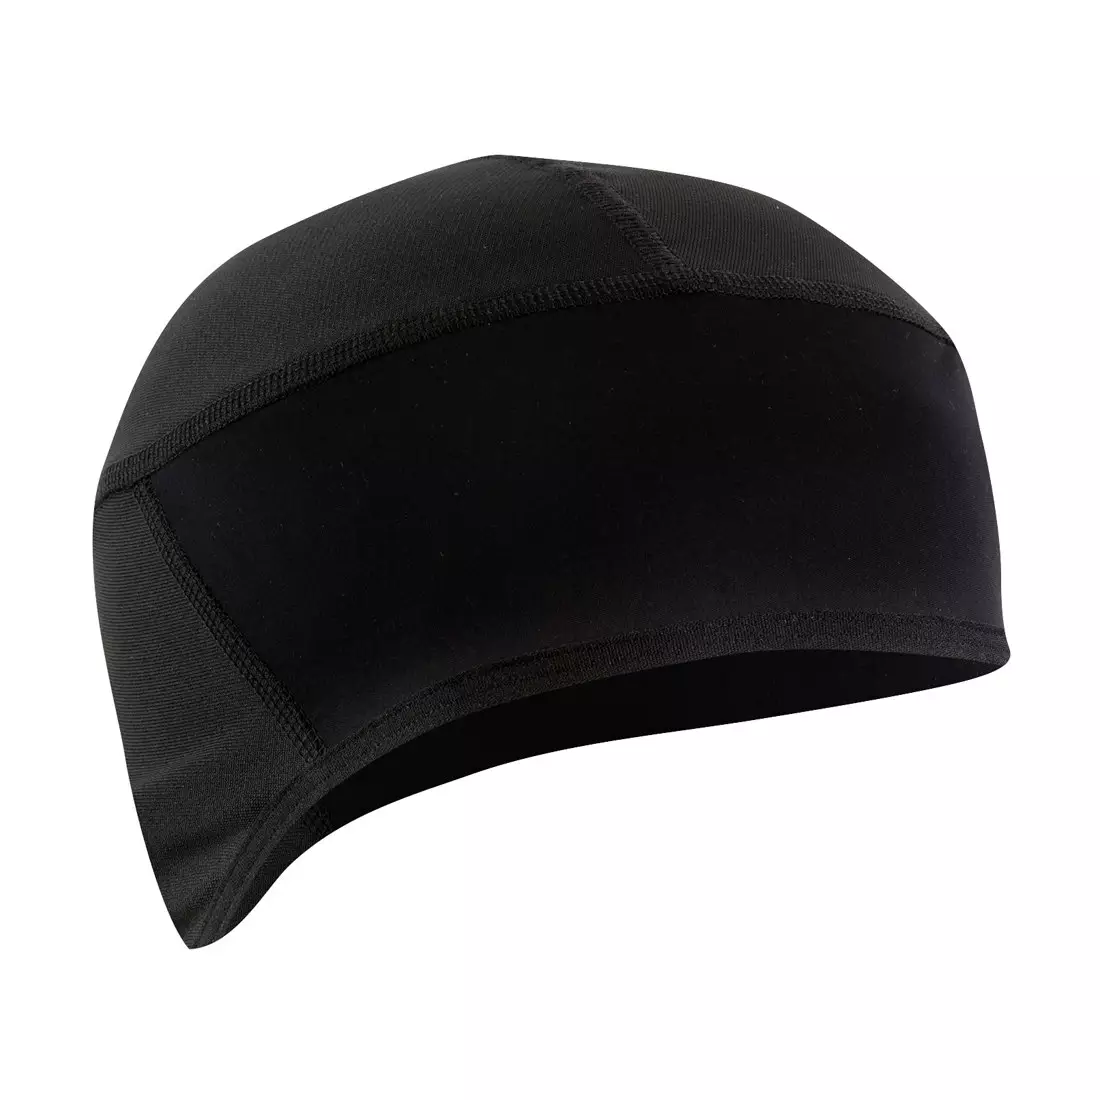 PEARL IZUMI AW17 Barrier Cap 14361601021ONE Black universal size